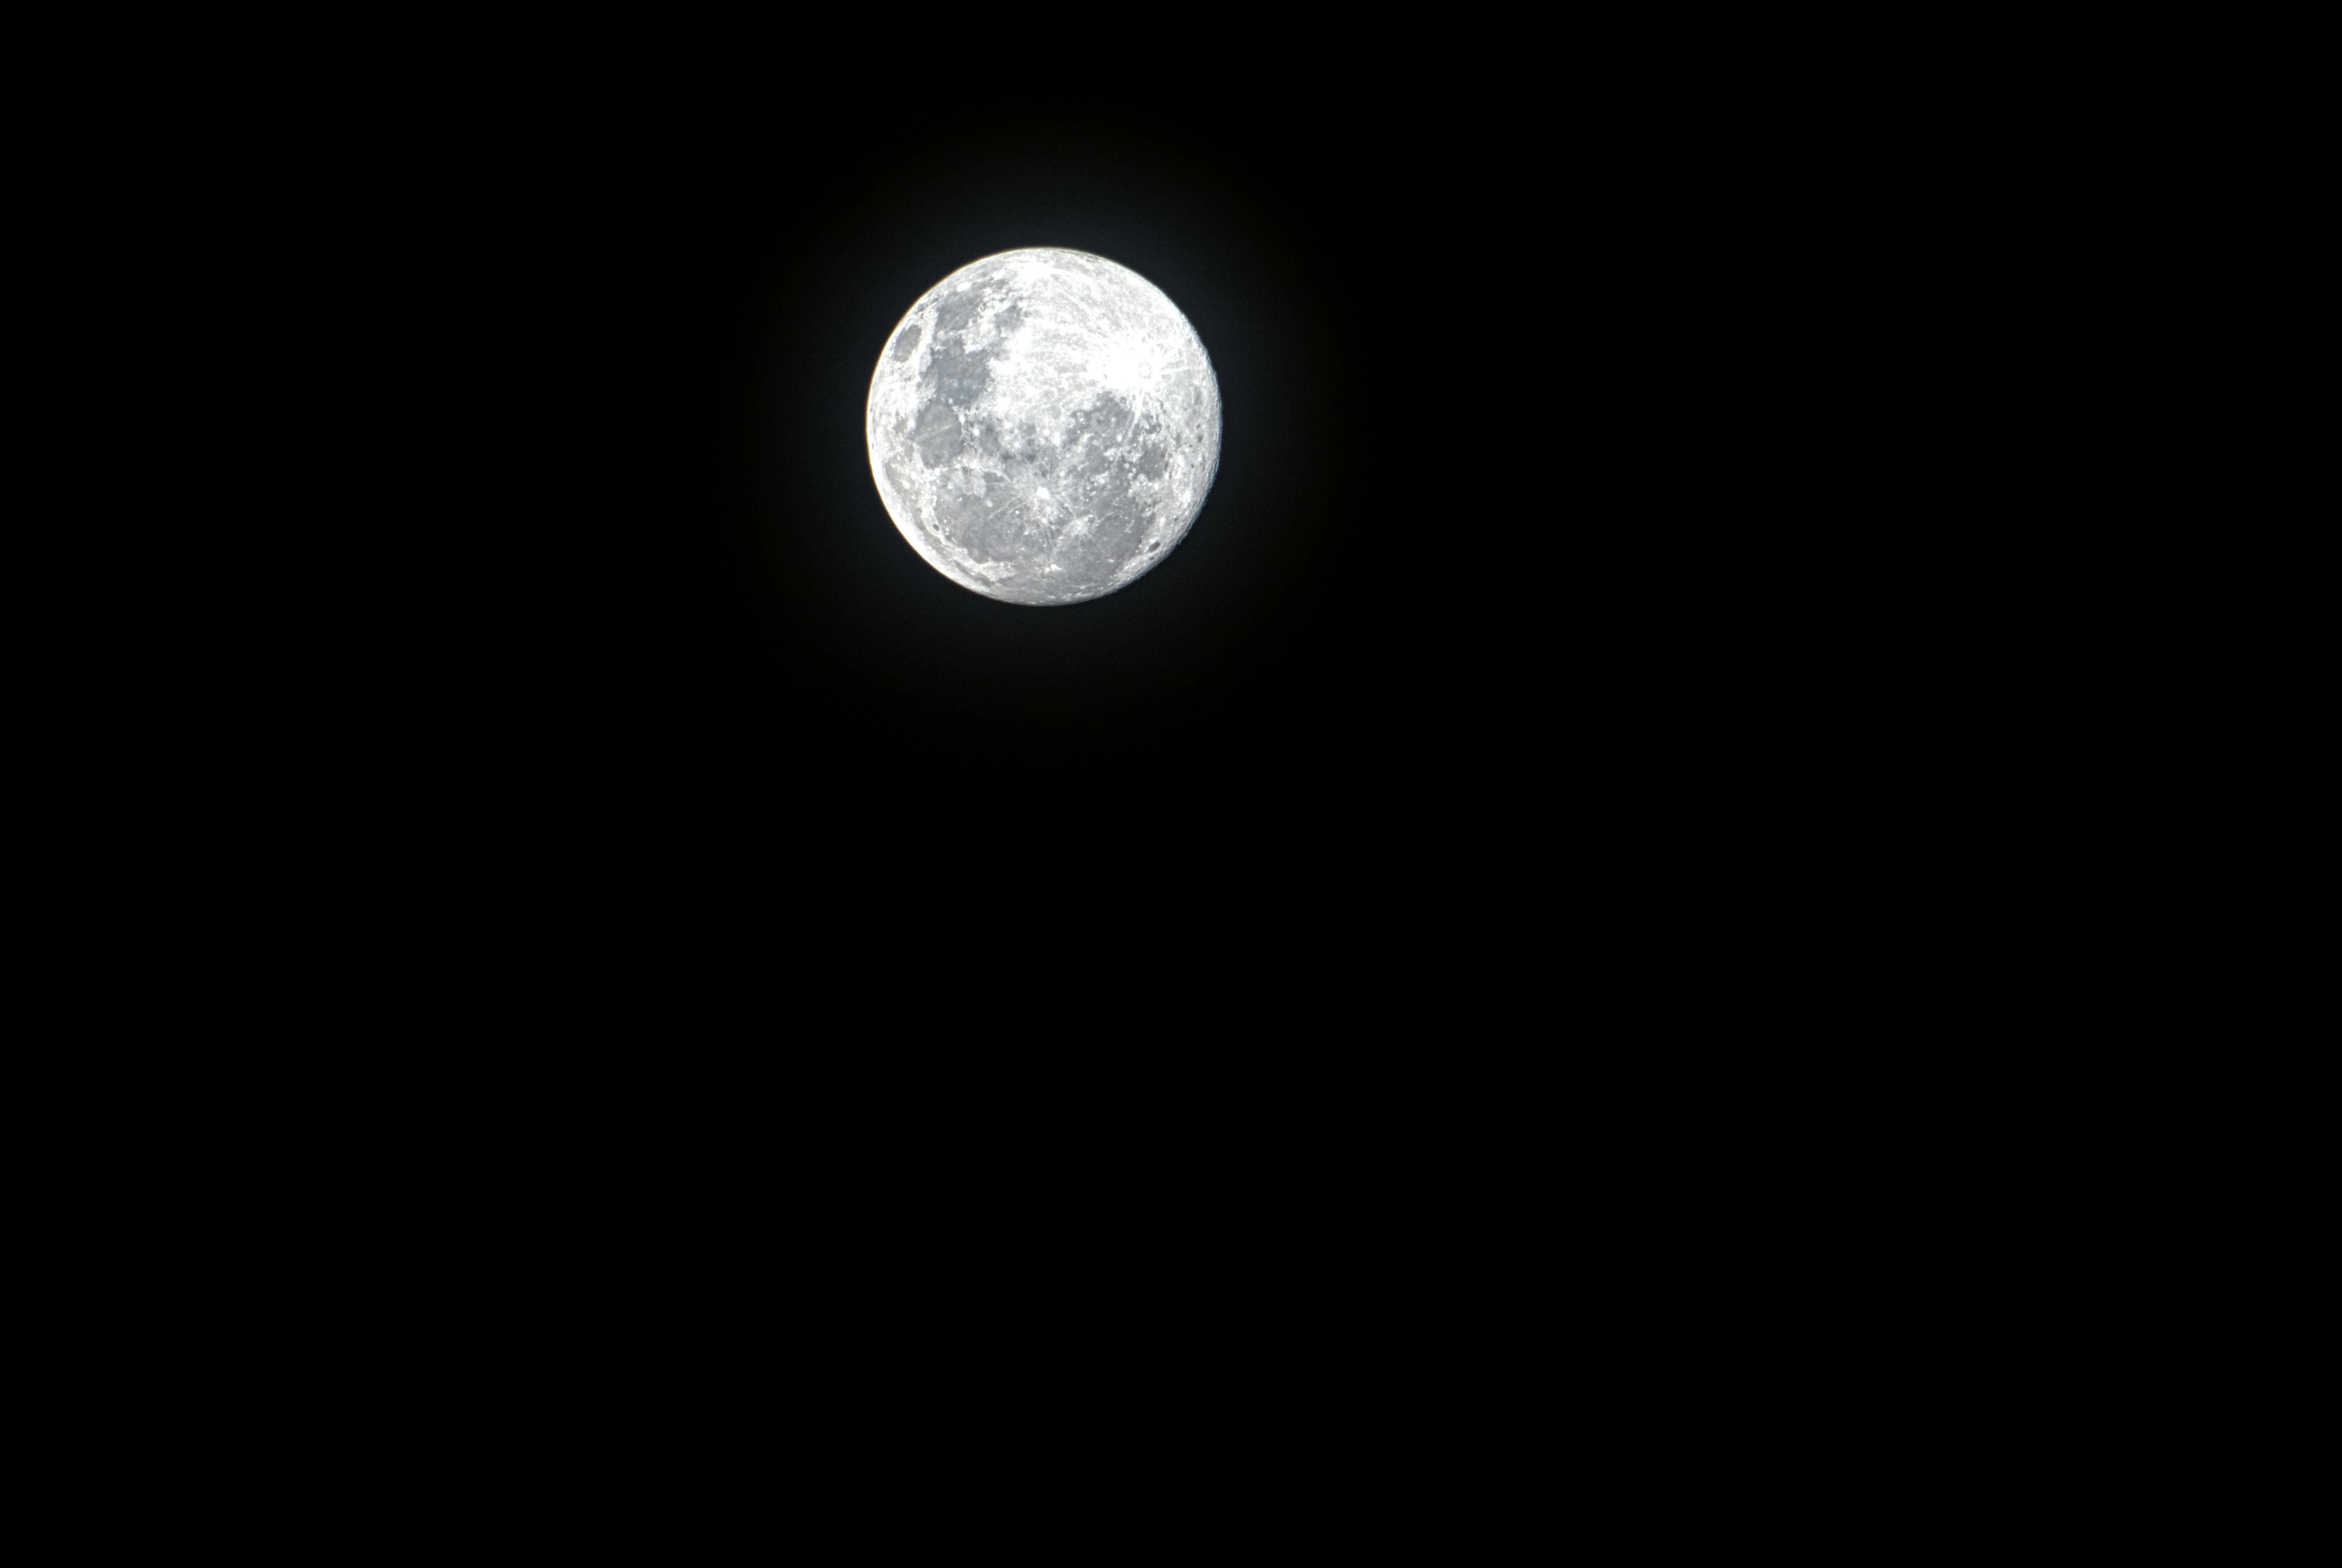 Full Moon in Black Background · Free Stock Photo